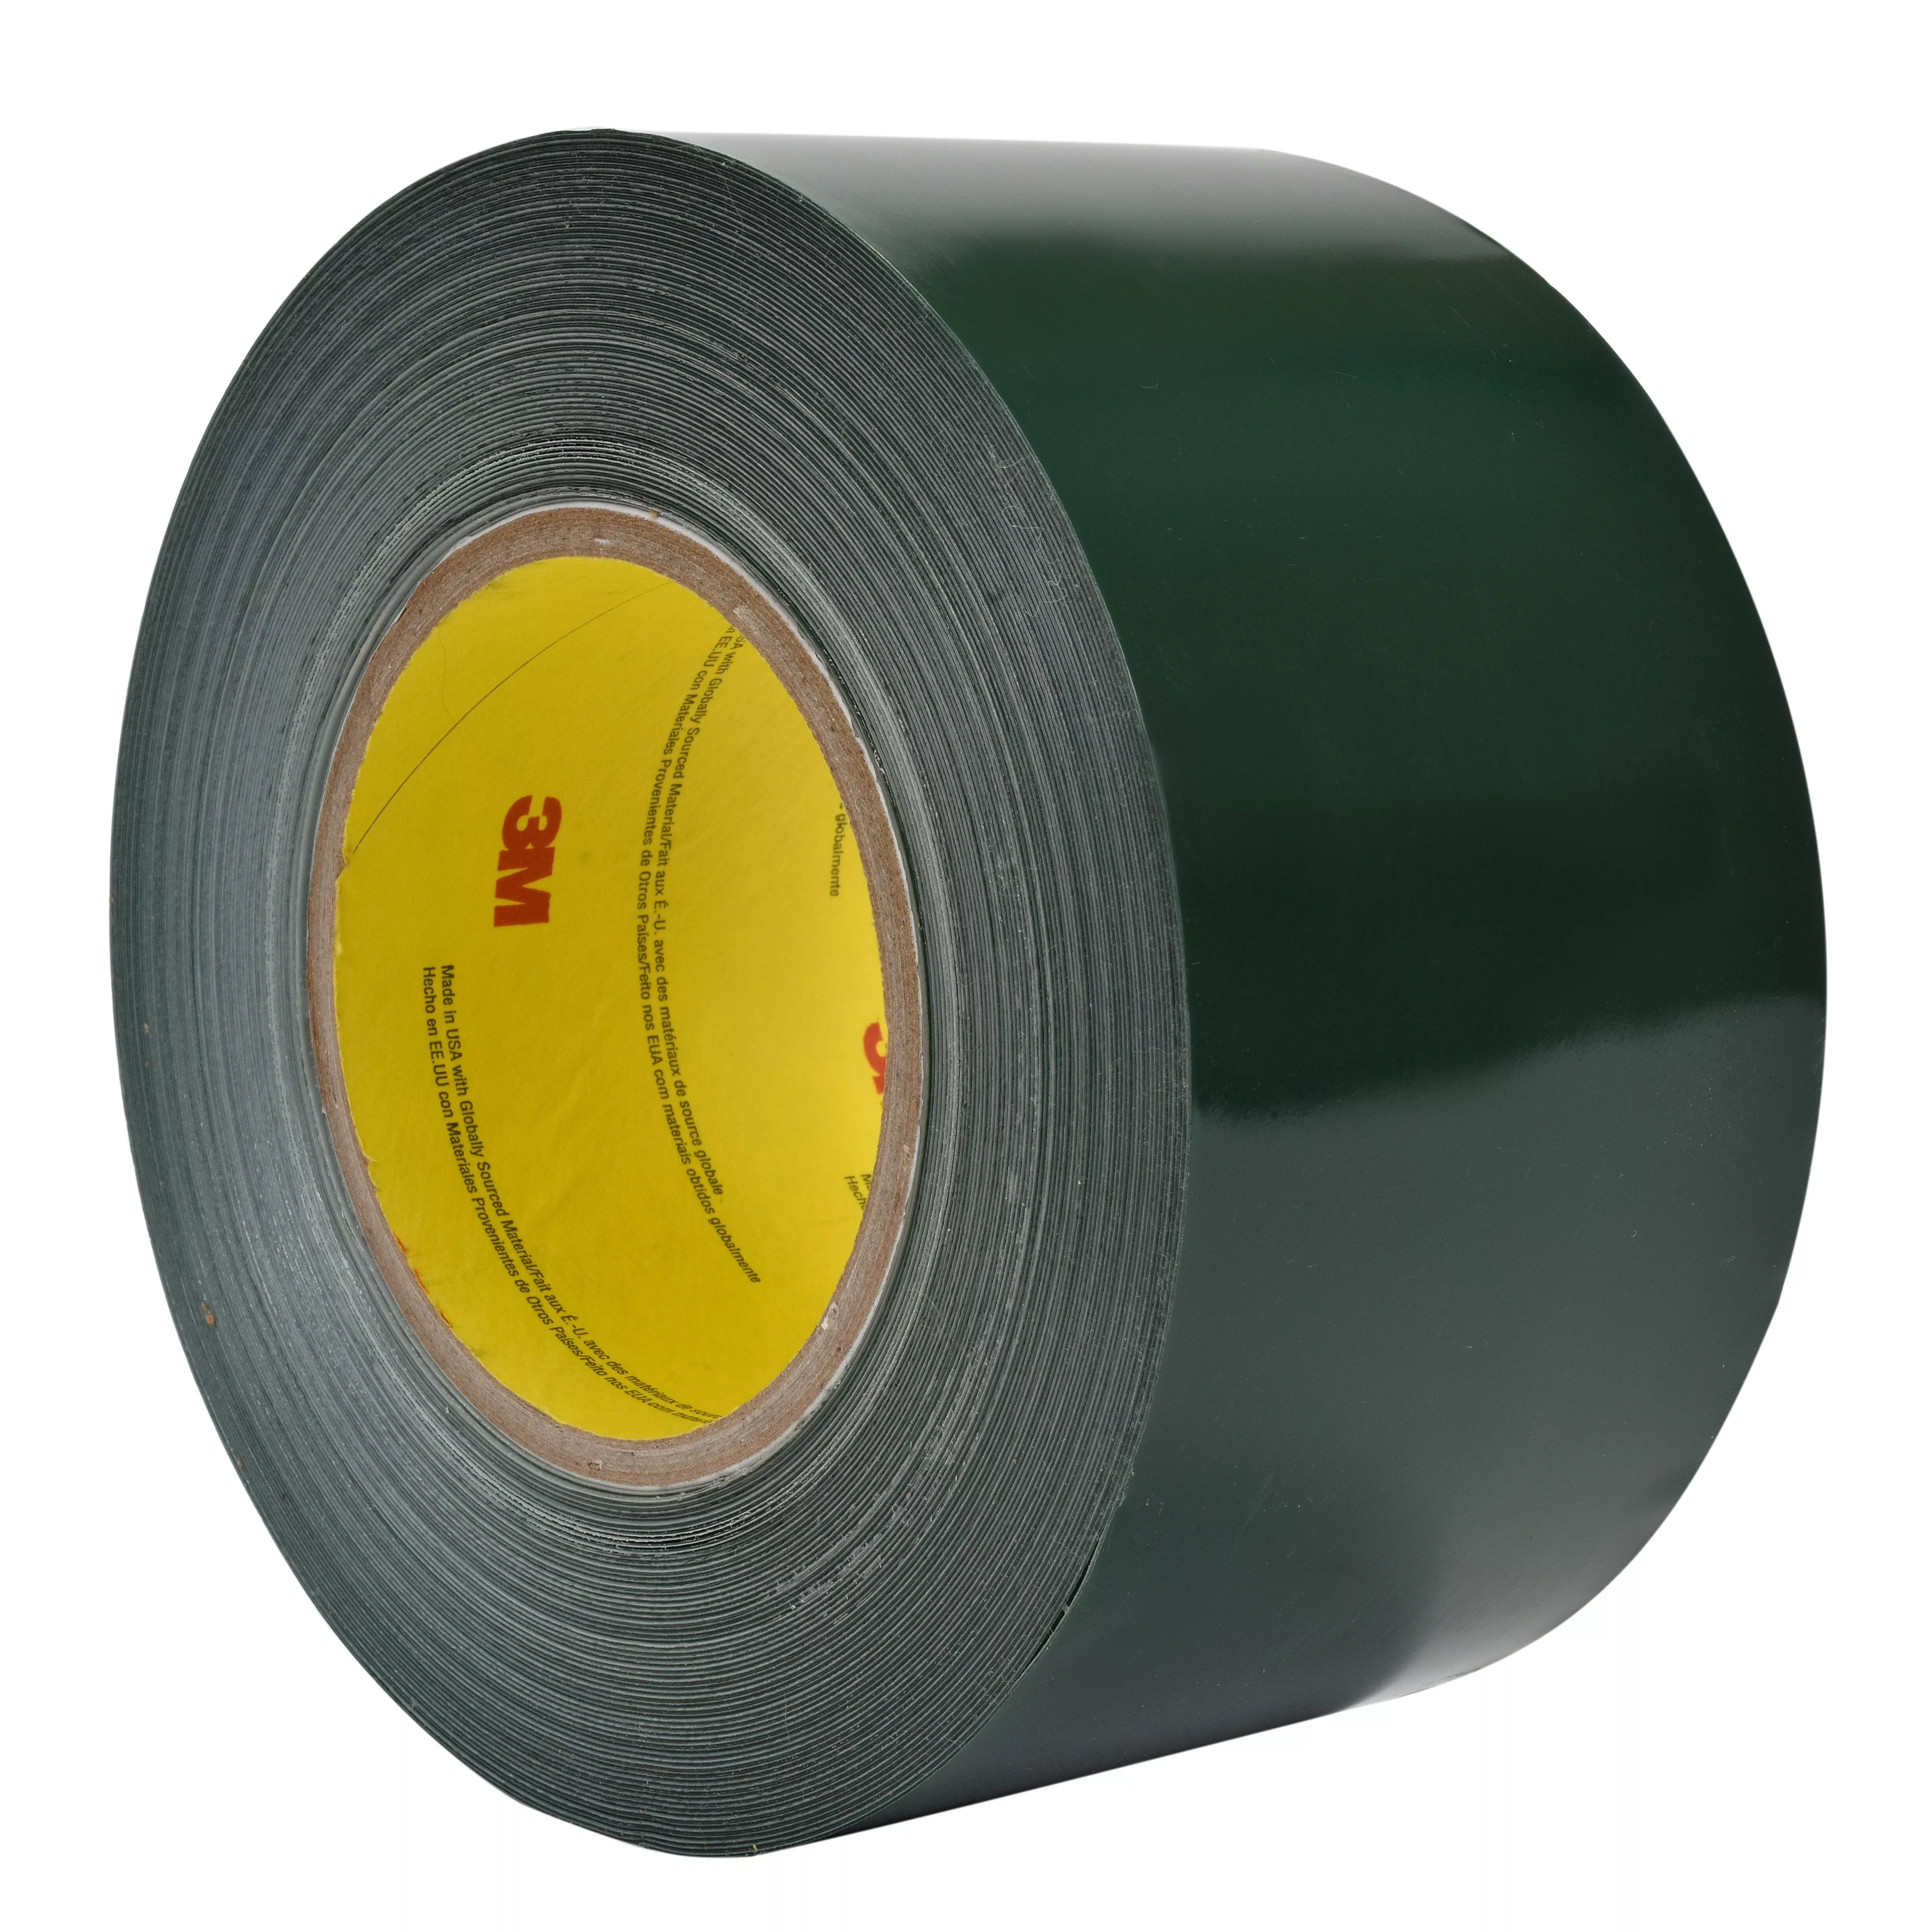 SKU 7100170120 | 3M™ Sealing and Holding Tape 8069